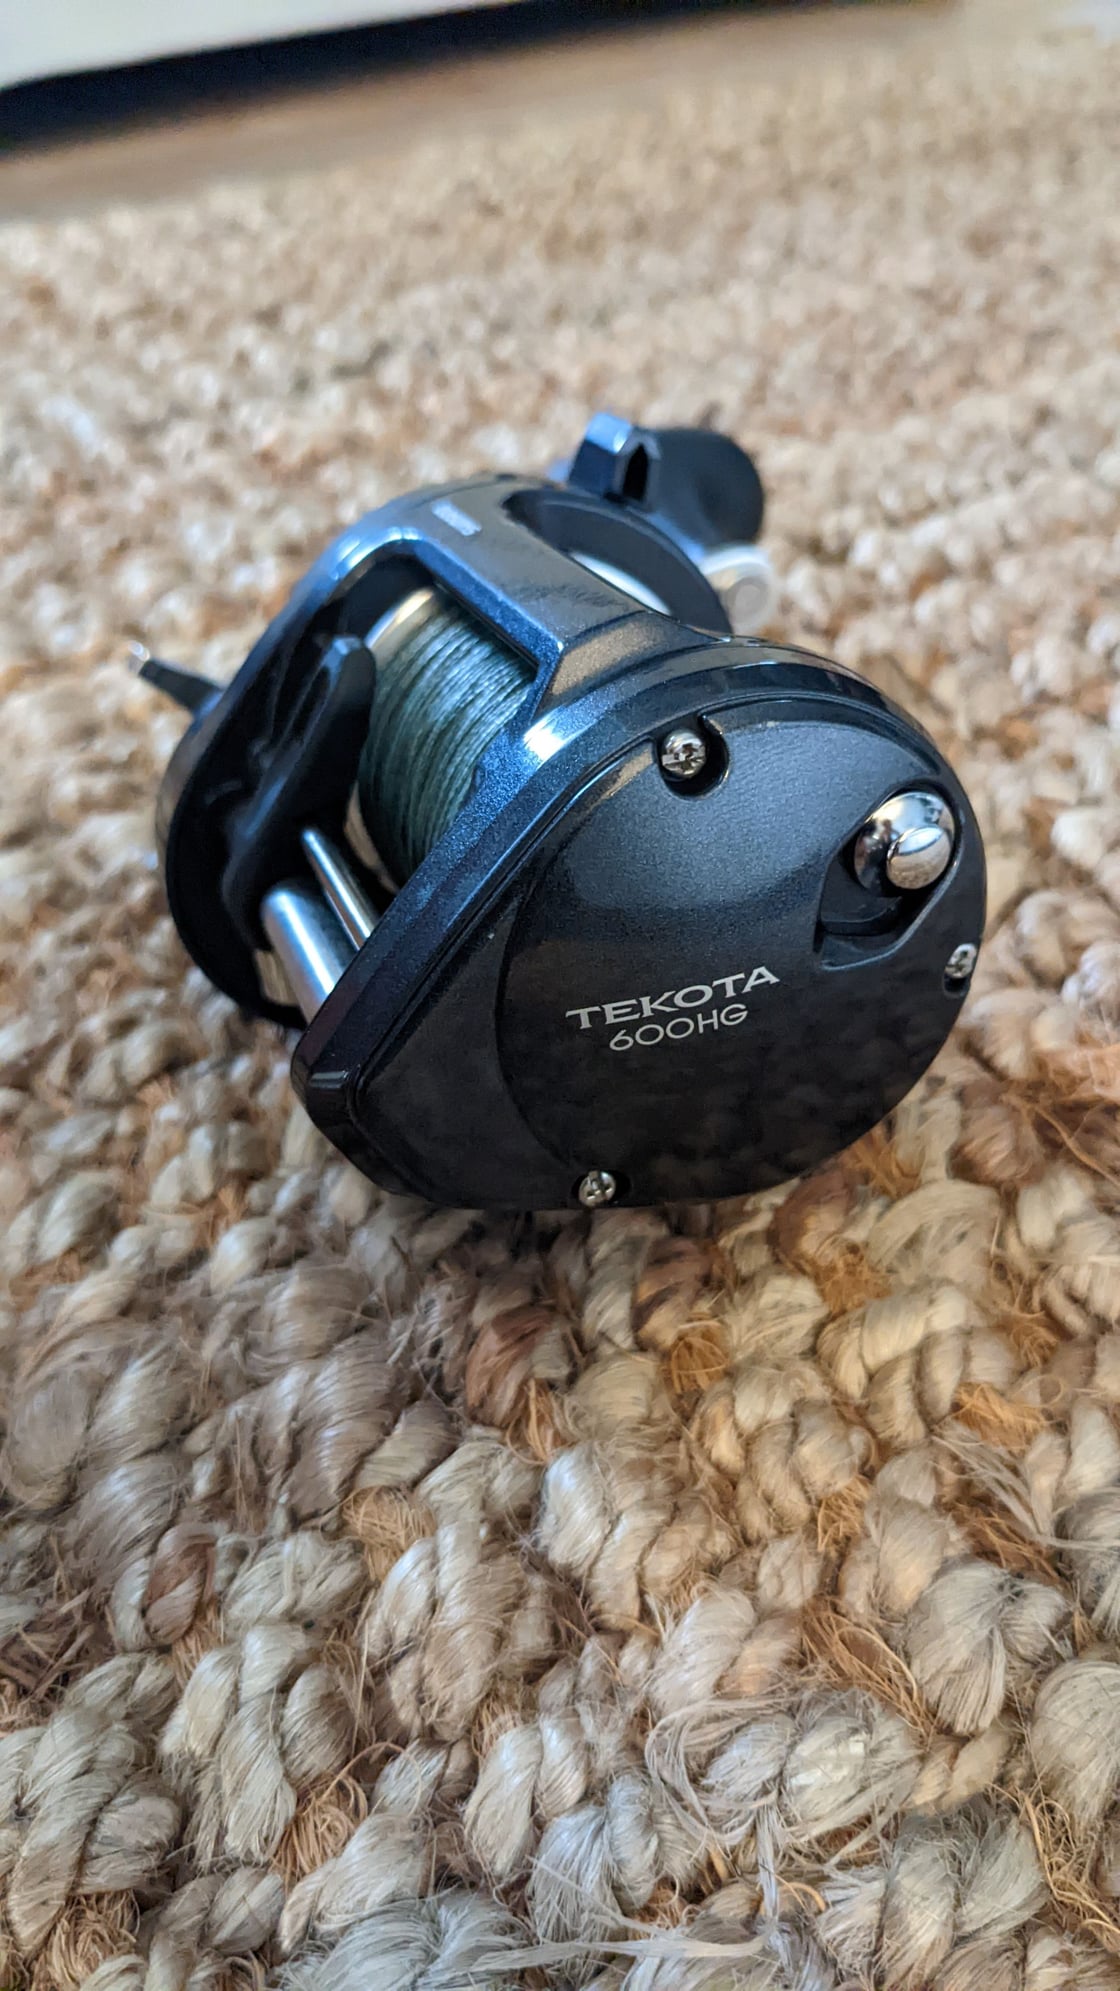 Shimano Tekota 600 HG for sale - The Hull Truth - Boating and Fishing Forum